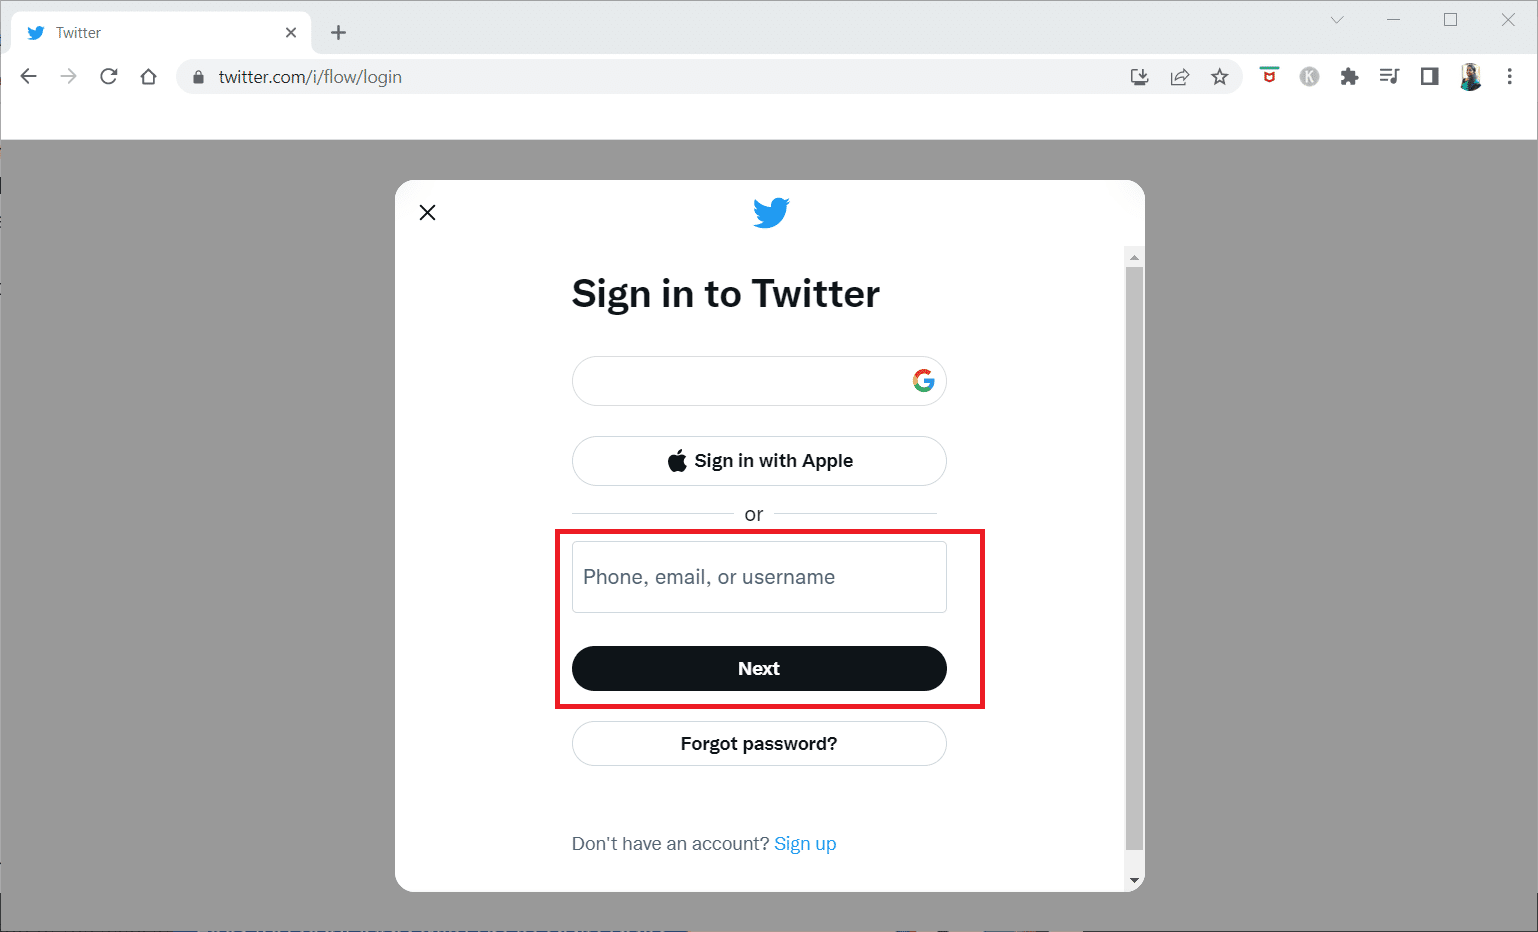 Log in to your Twitter account using your credentials in Twitter Desktop view